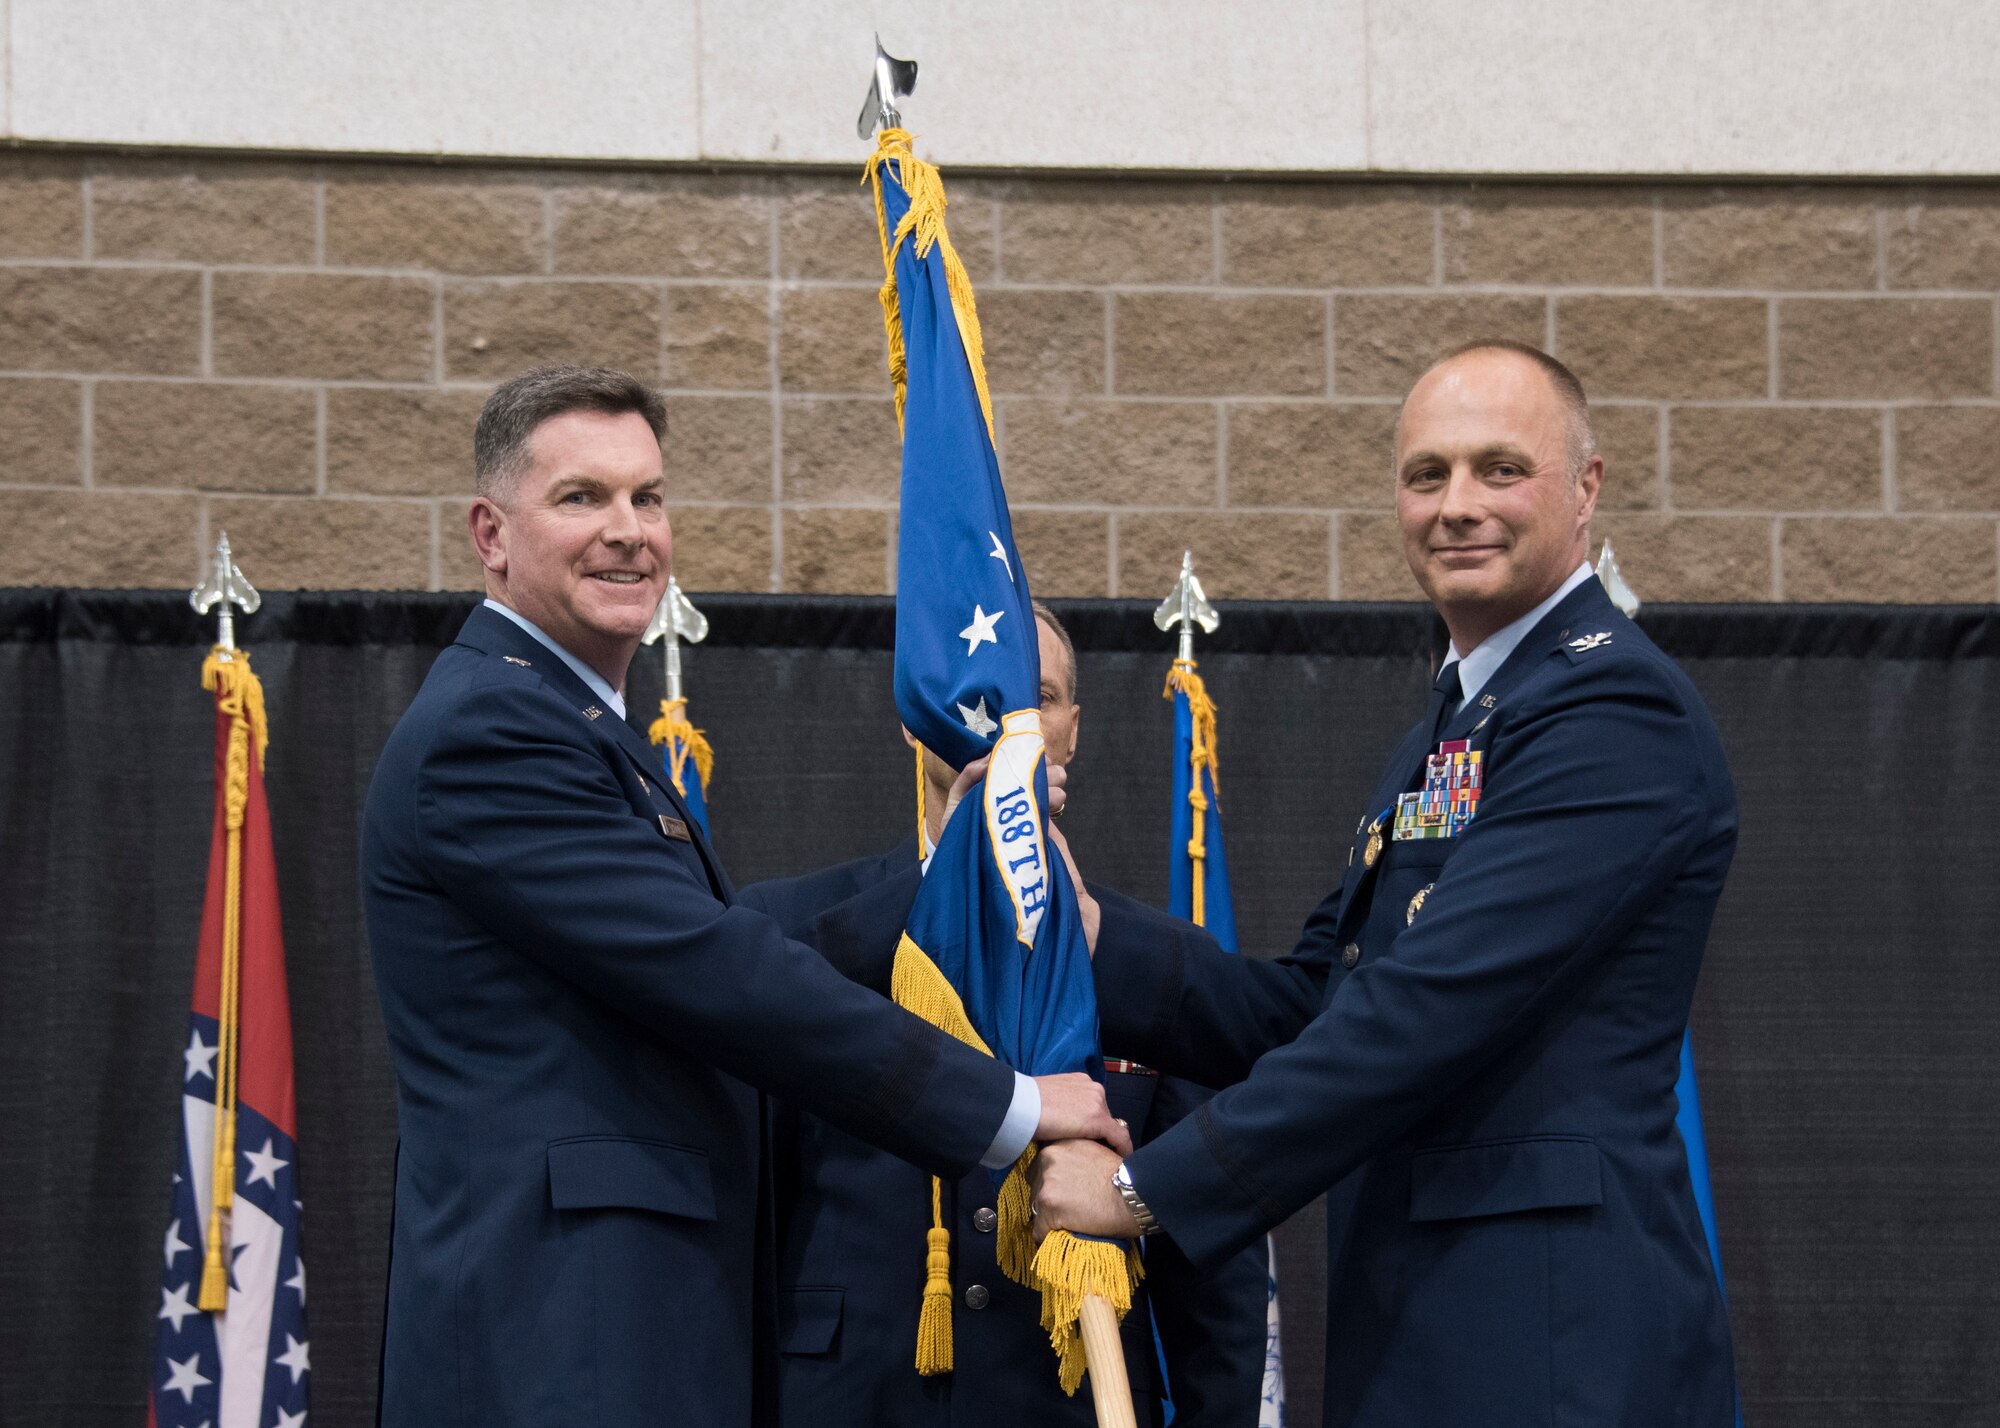 Col. Robert I. Kenney relinquishes command of the 188th Wing to Brig. Gen. Thomas D. Crimmins, Arkansas National Guard air component commander, during a change of command ceremony at Fort Smith, Ark., Aug. 11, 2019. The change of command is a military tradition signified with the passing of the unit's guidon flag from one commander to the next. (U.S. Air National Guard photo by Tech. Sgt. John E. Hillier)